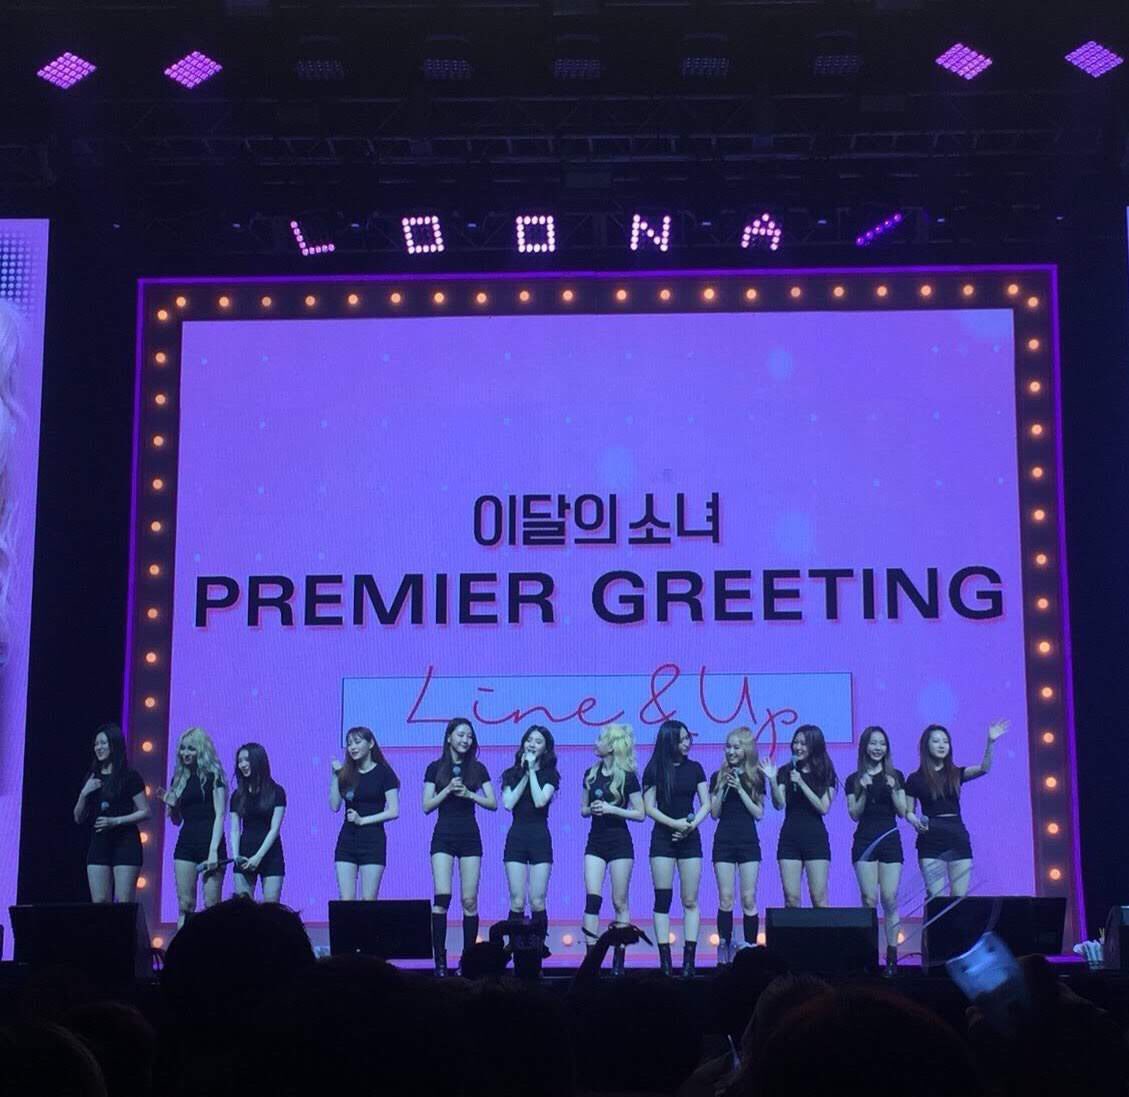 The long awaited, first pictures of all loona girls together